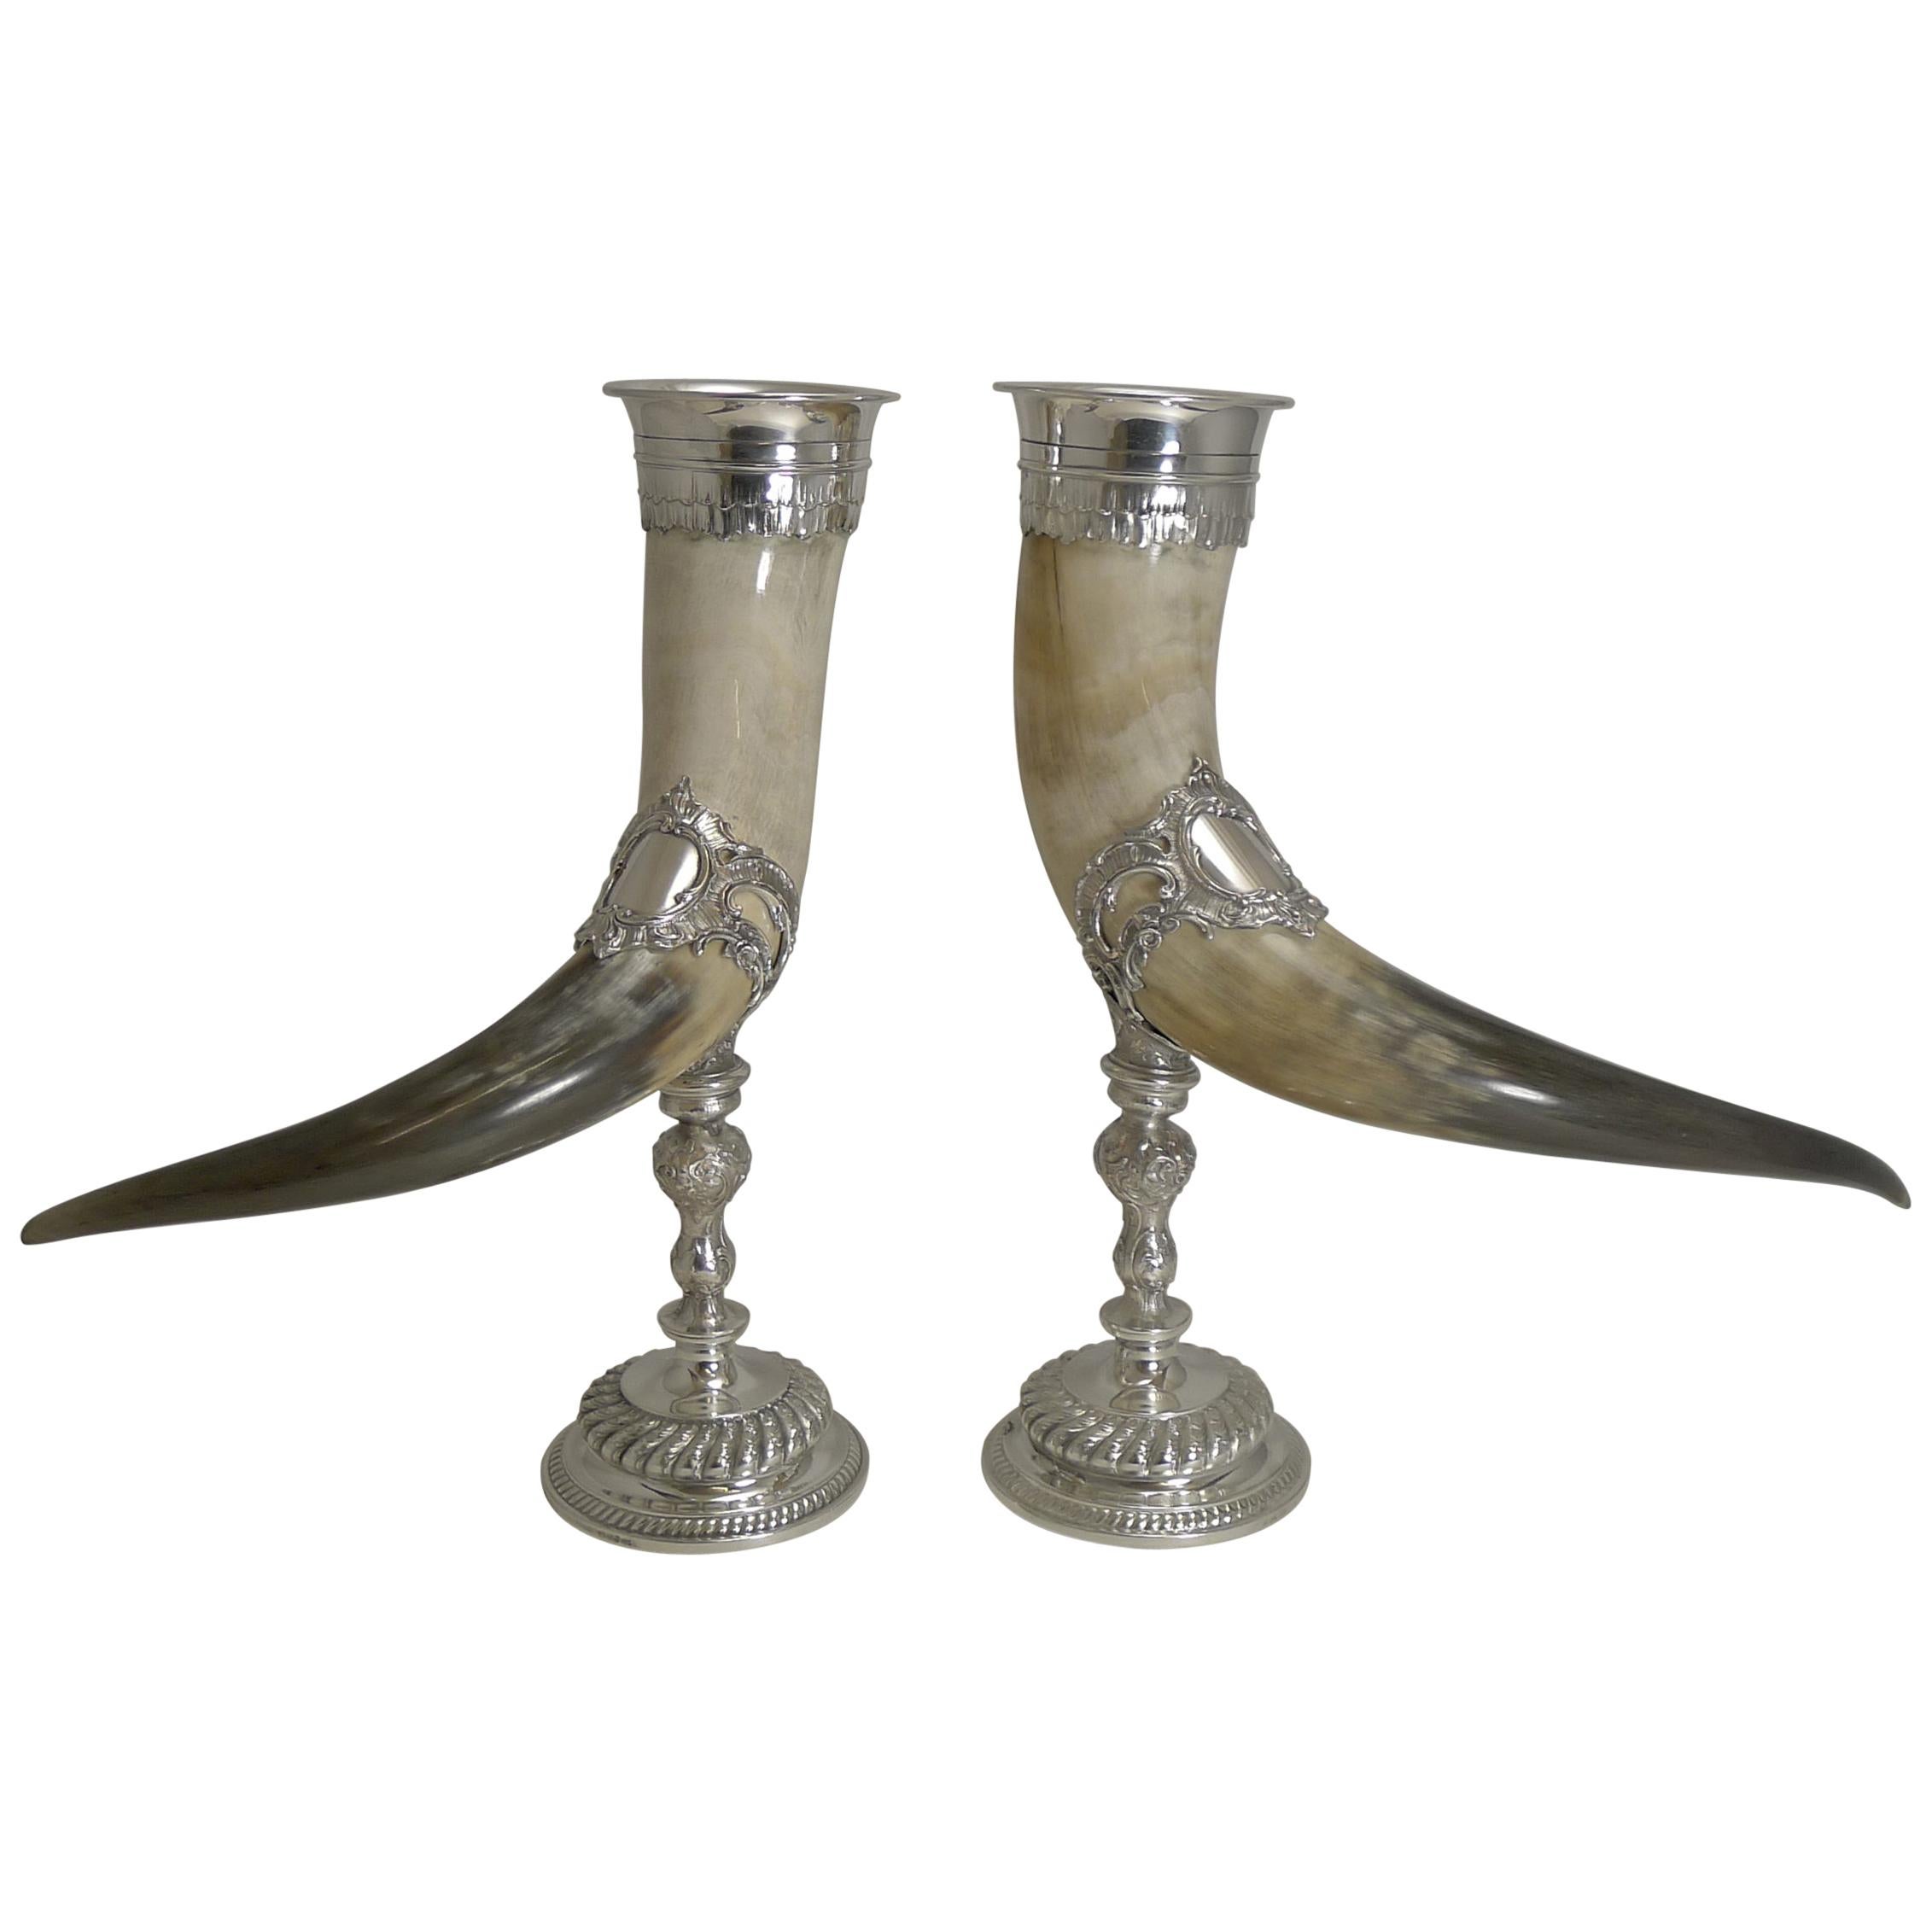 Outstanding Large Pair of Horn and Silver Plate Cornucopia, circa 1900